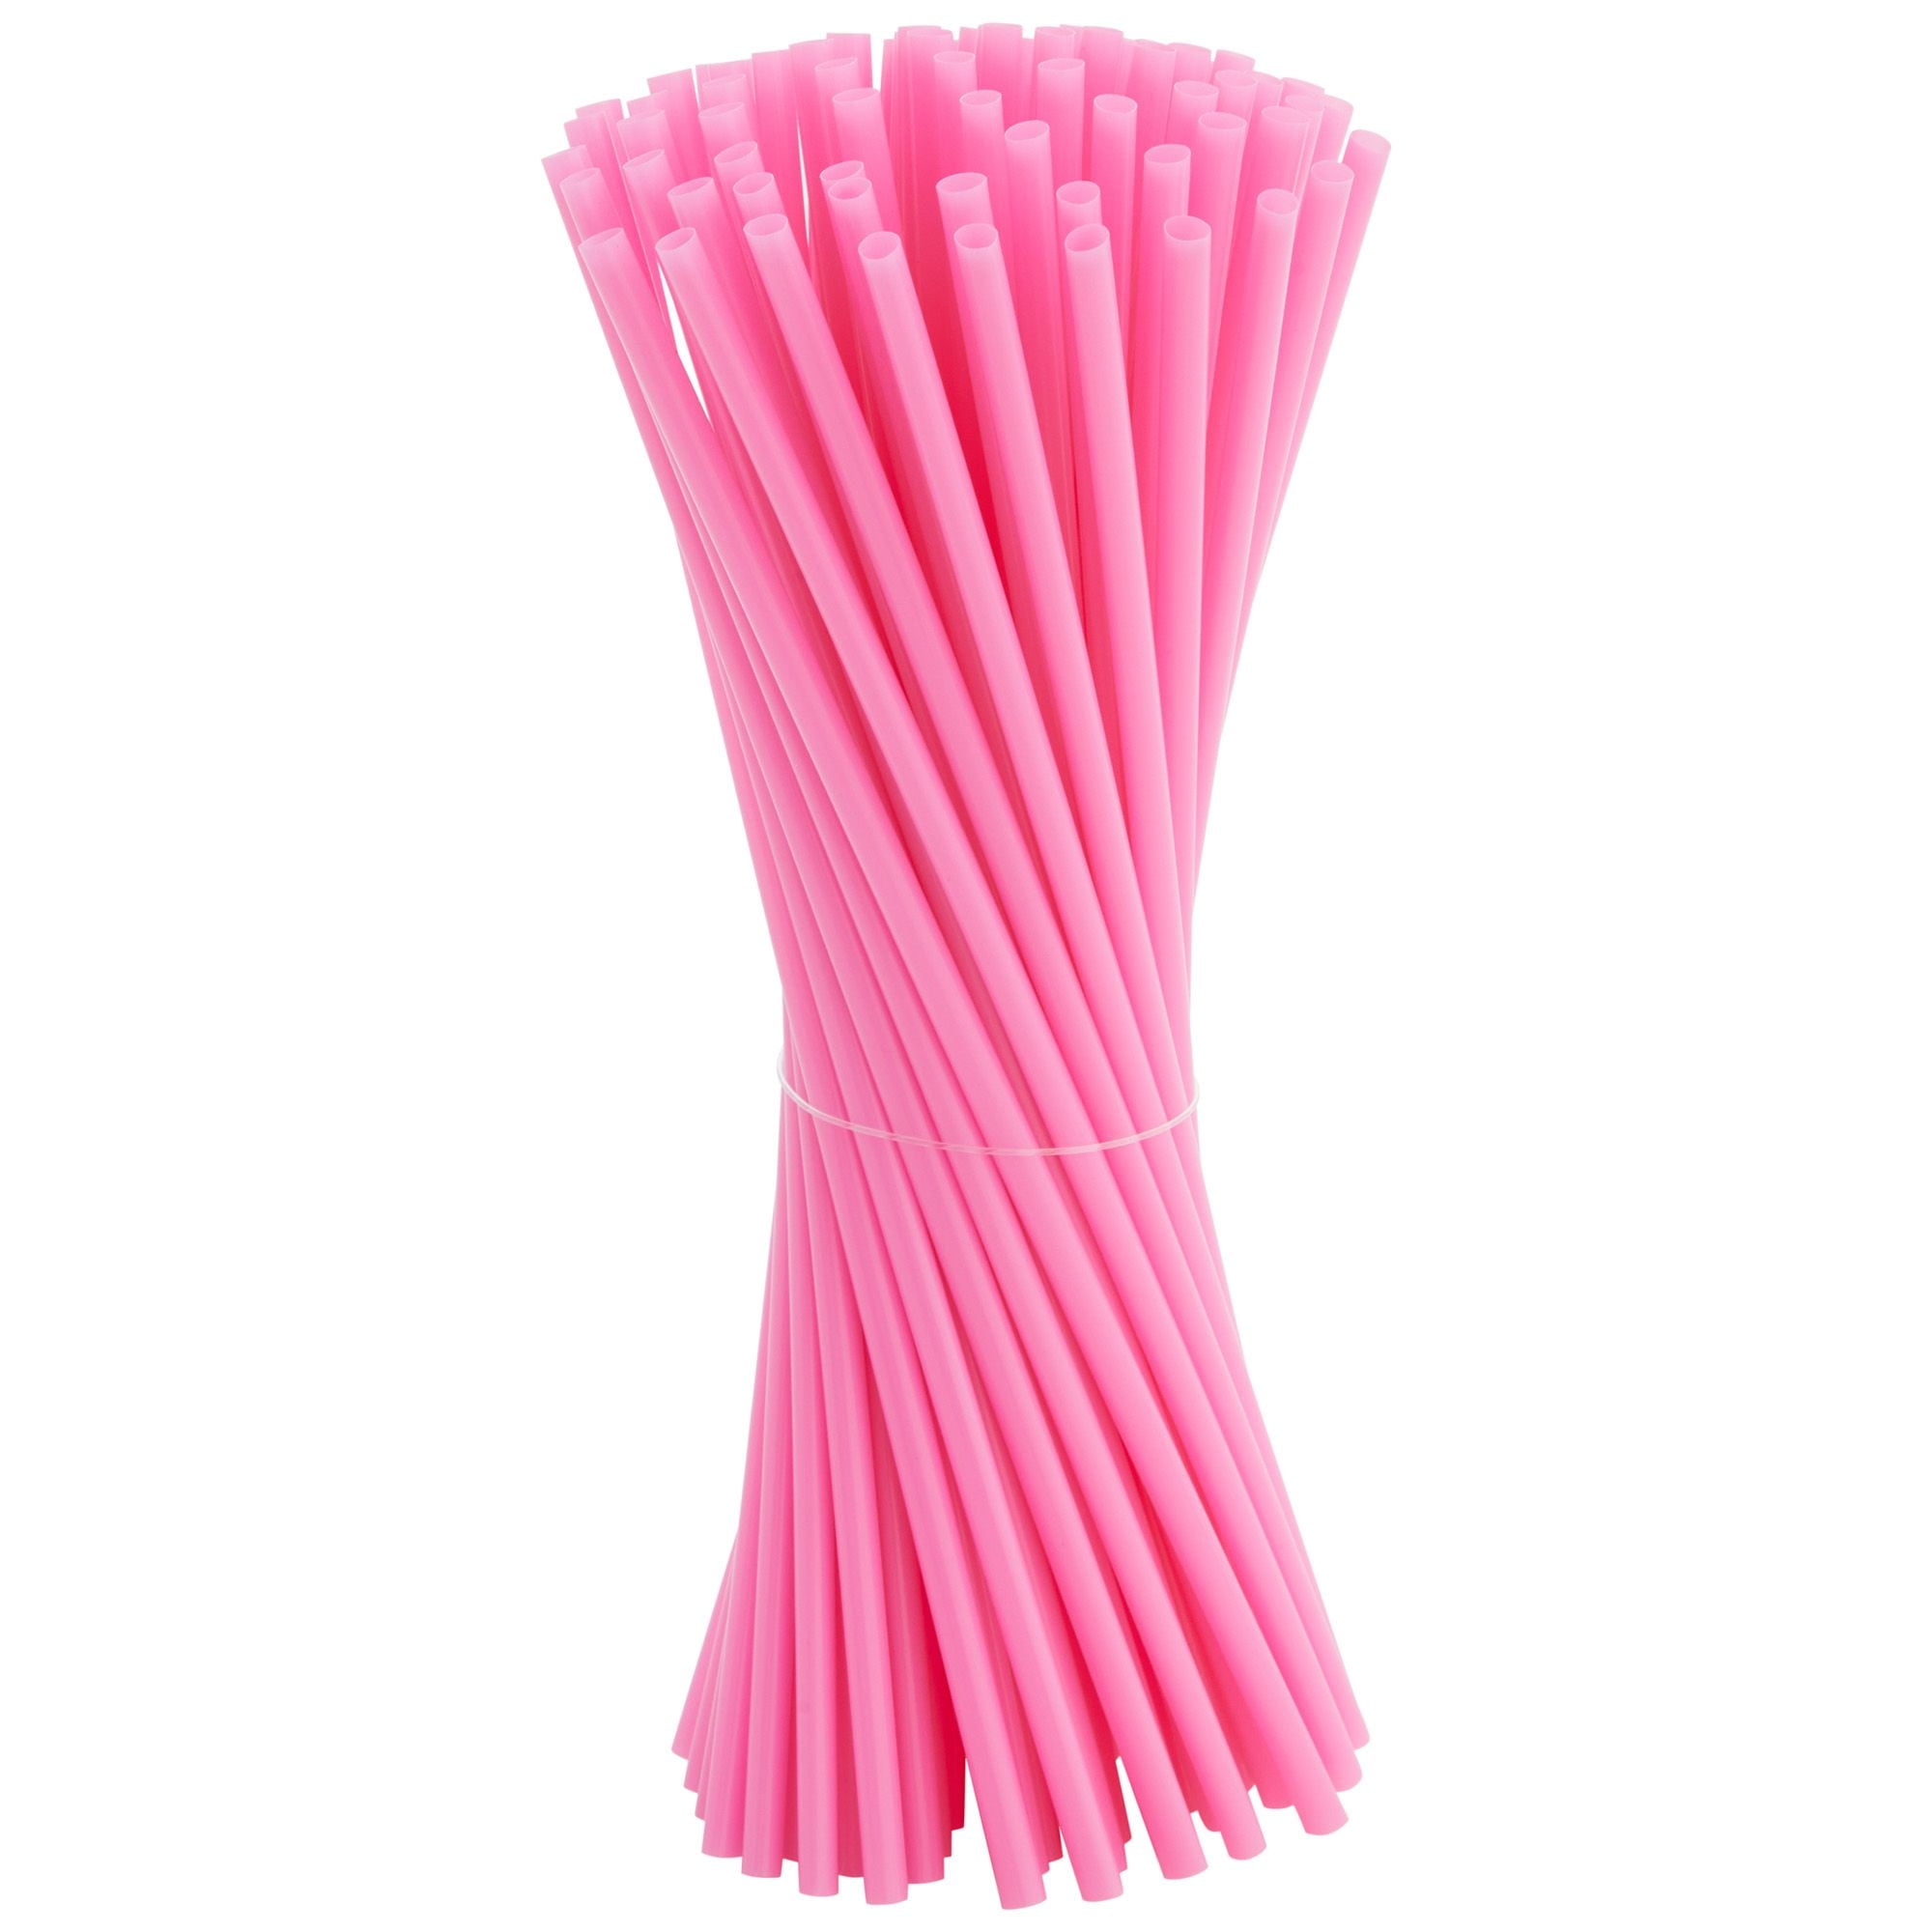  Disposable Hot Pink Plastic Flex Straws - 11.5, 50 Count -  Perfect for Parties & Everyday Use : Health & Household